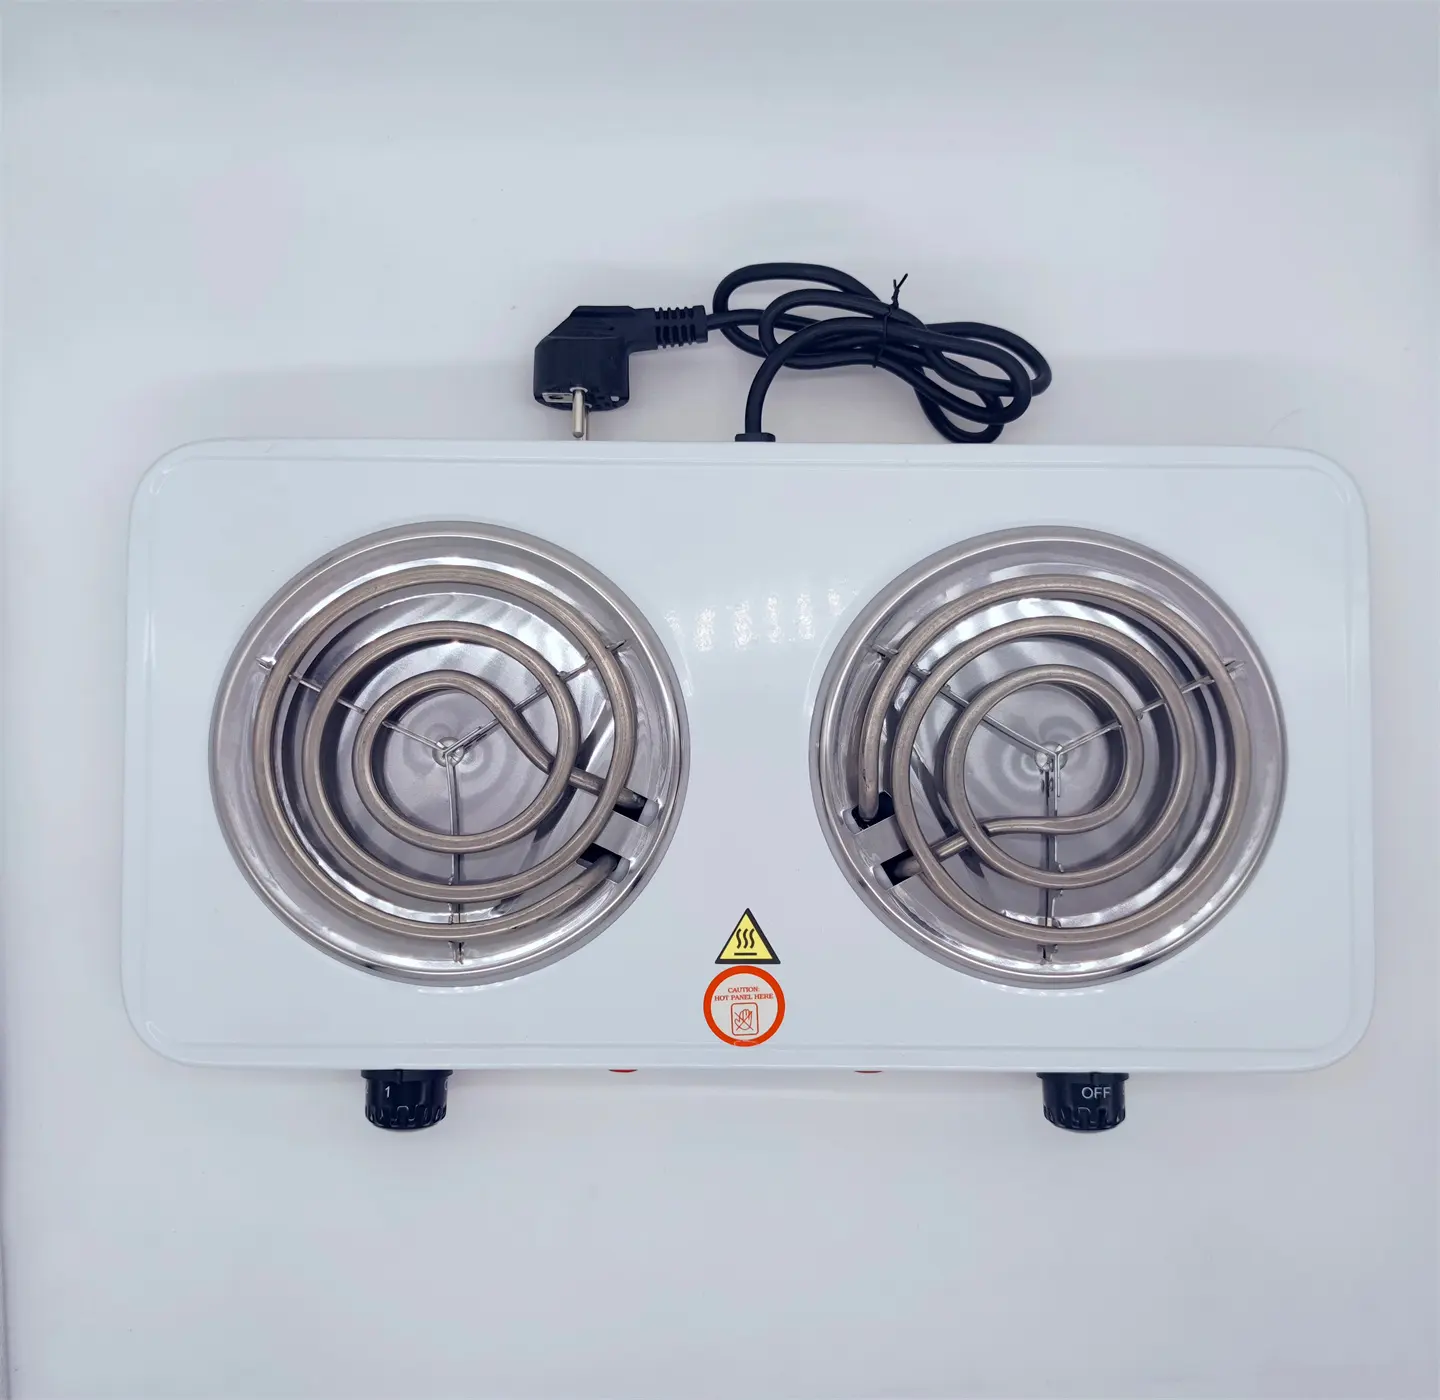 Portable Electric Stove 2000W Hot Plate Cooker 2 Burner Hot Plate